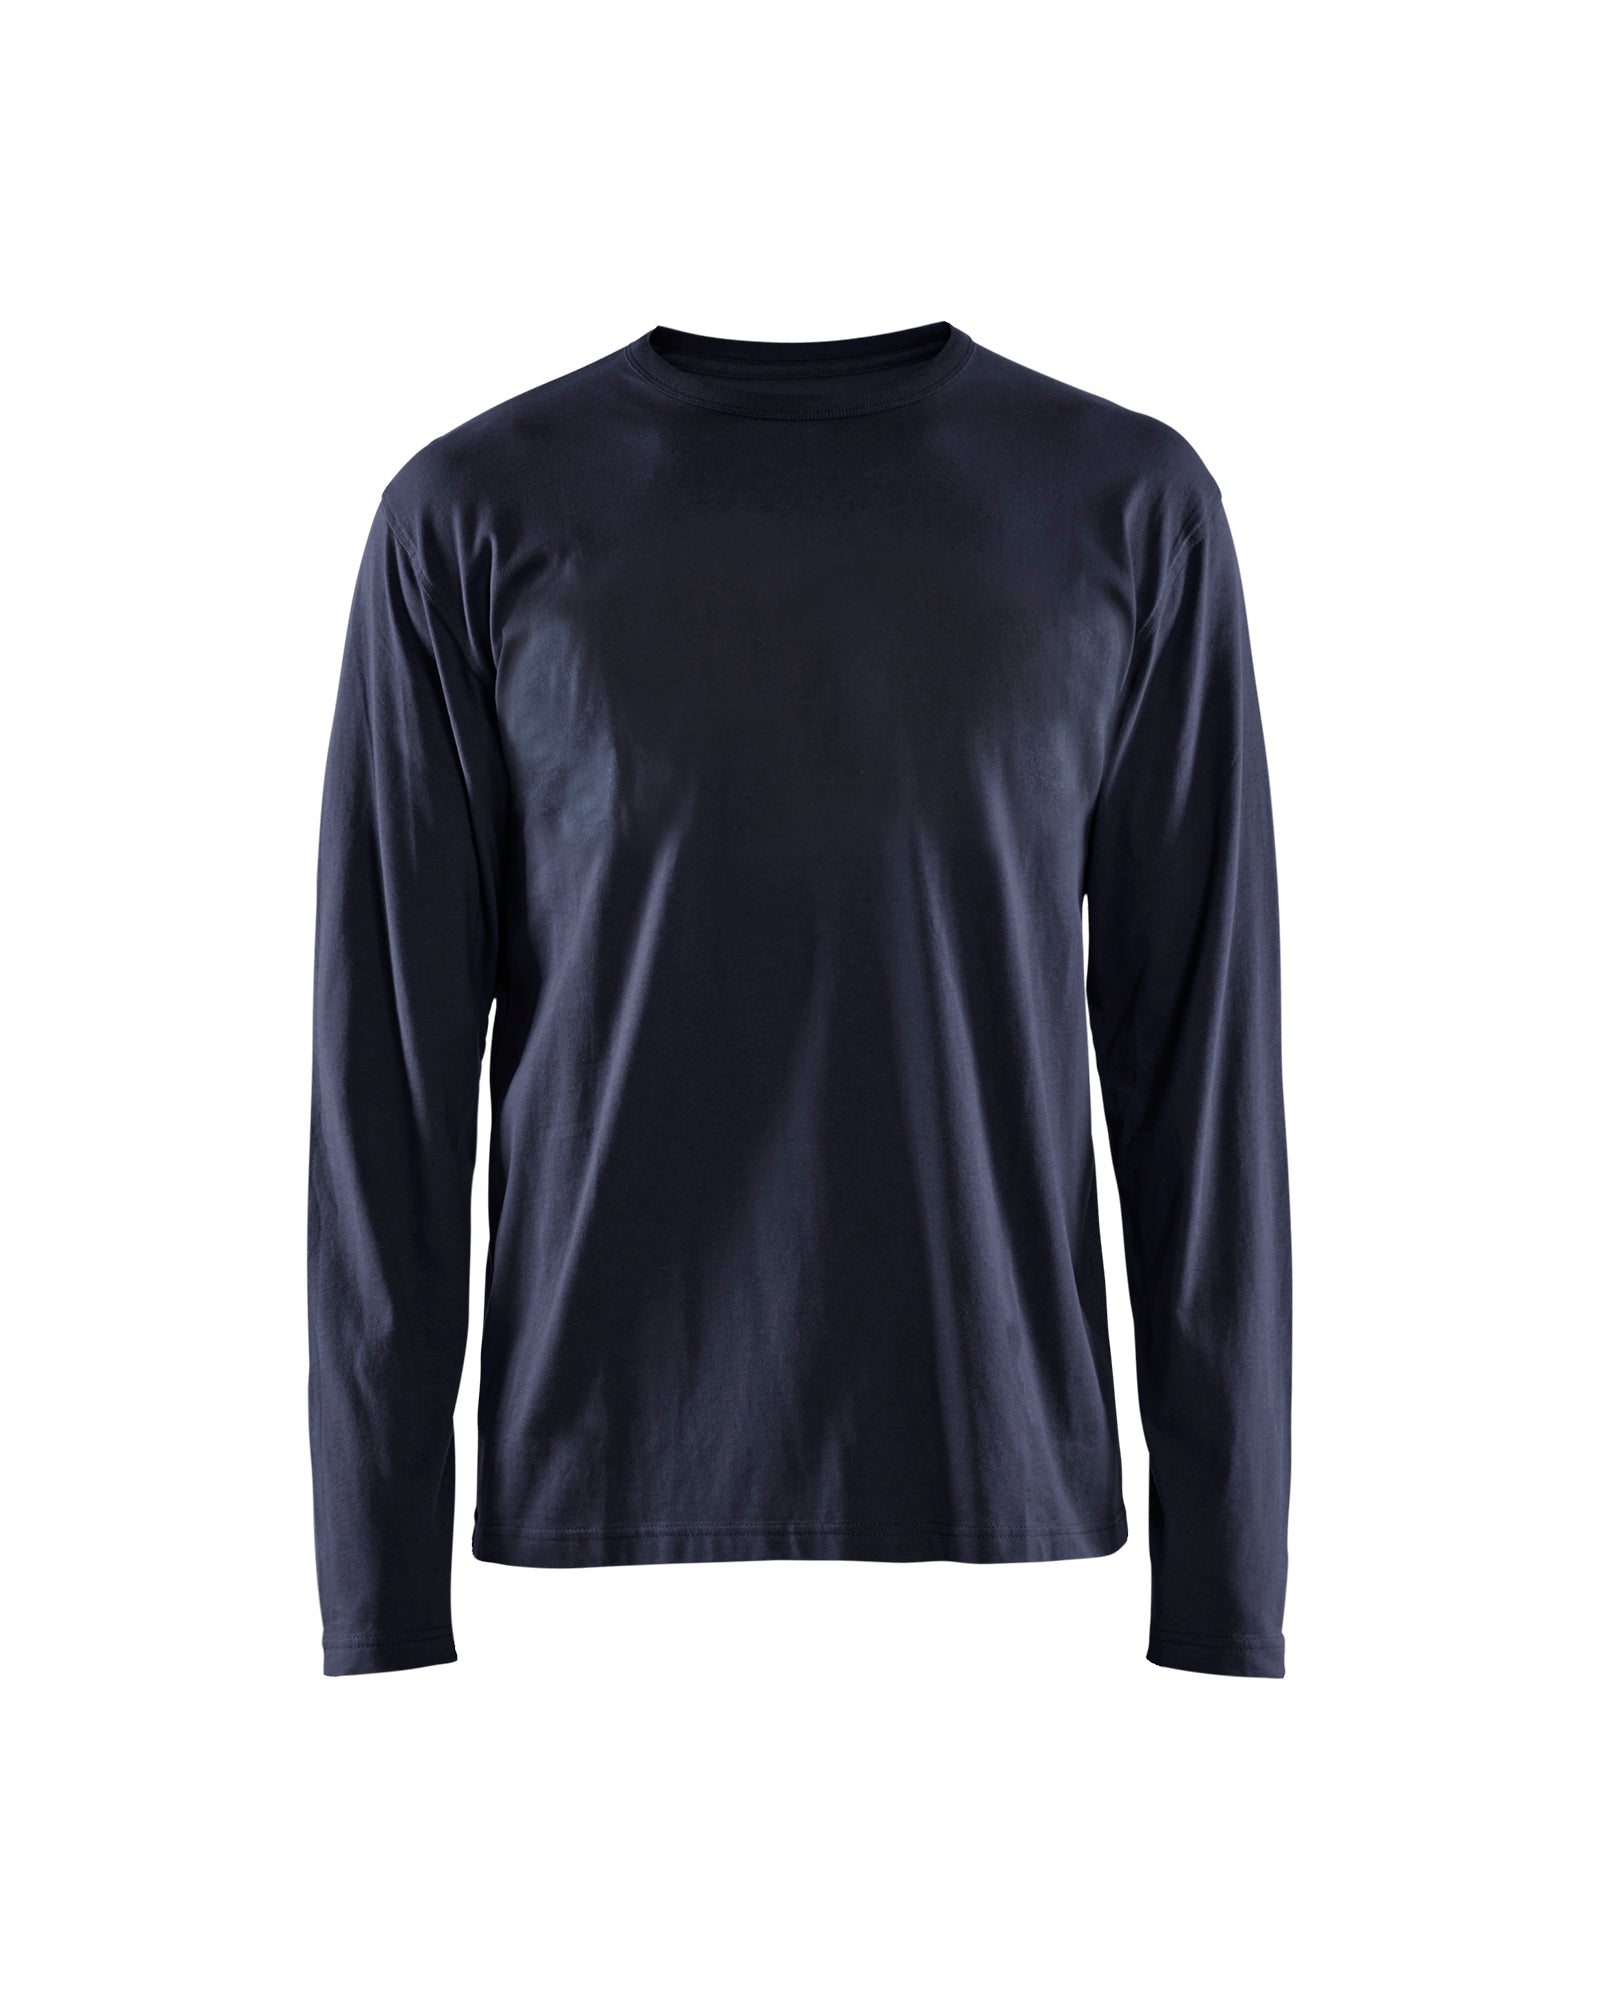 Men's Blaklader US Long Sleeves T-Shirt in Navy Blue from the front view